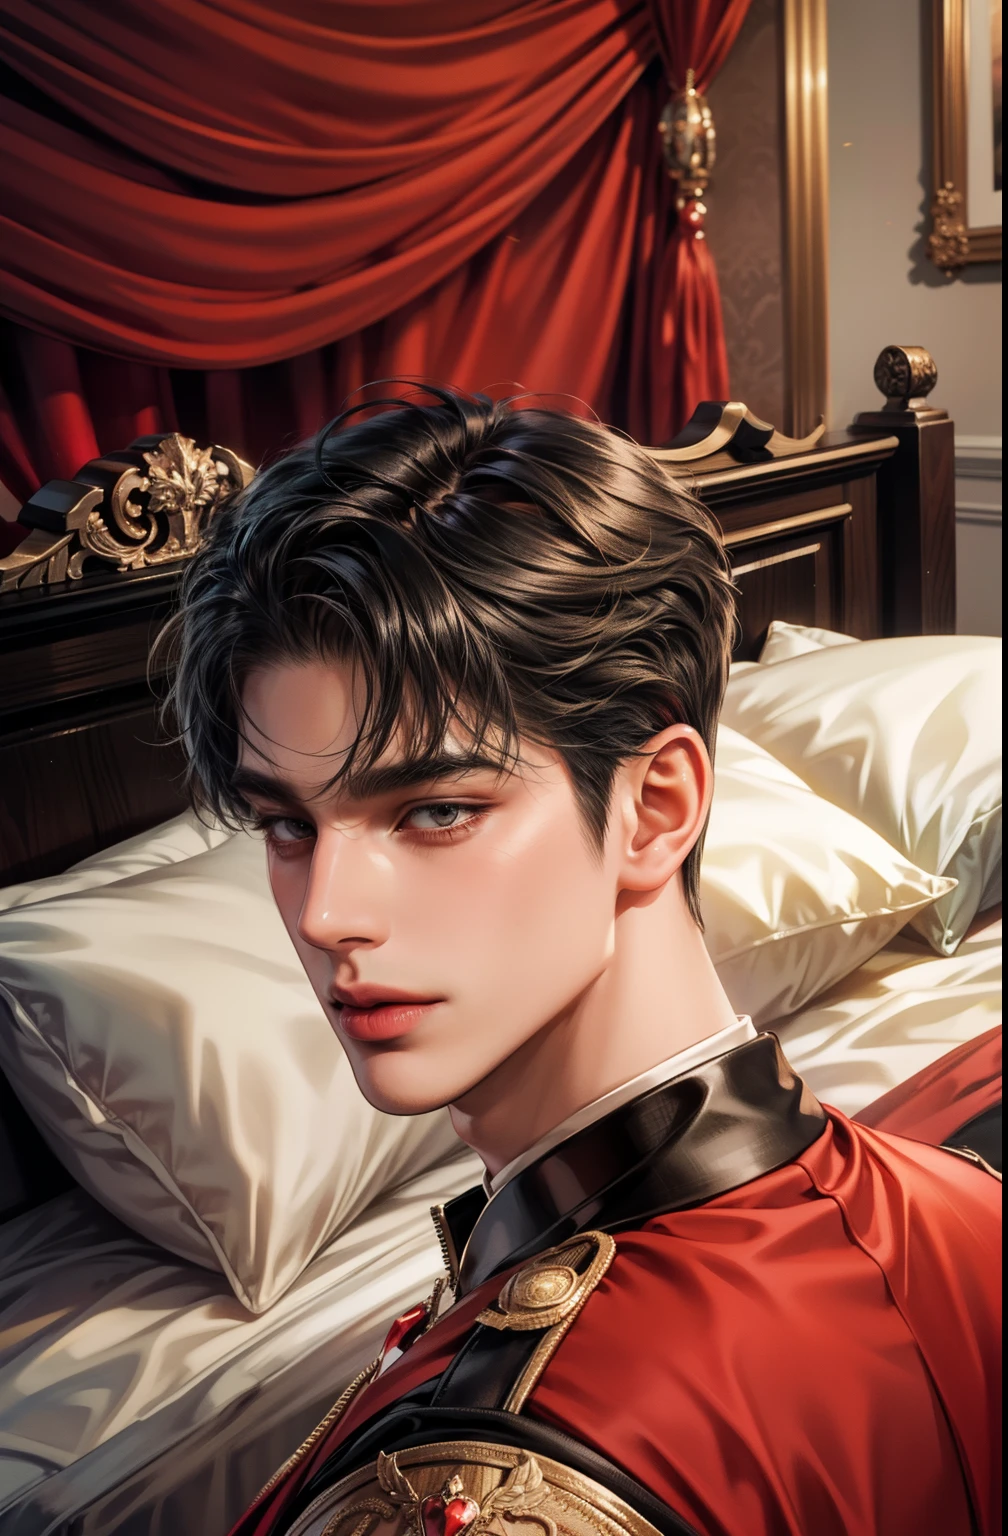 Masuter Piece，ultra-definition，handsome boy, soft black short hair，No people, Beautiful and accurately depicted bodies and faces, Red blush, love hotel bed